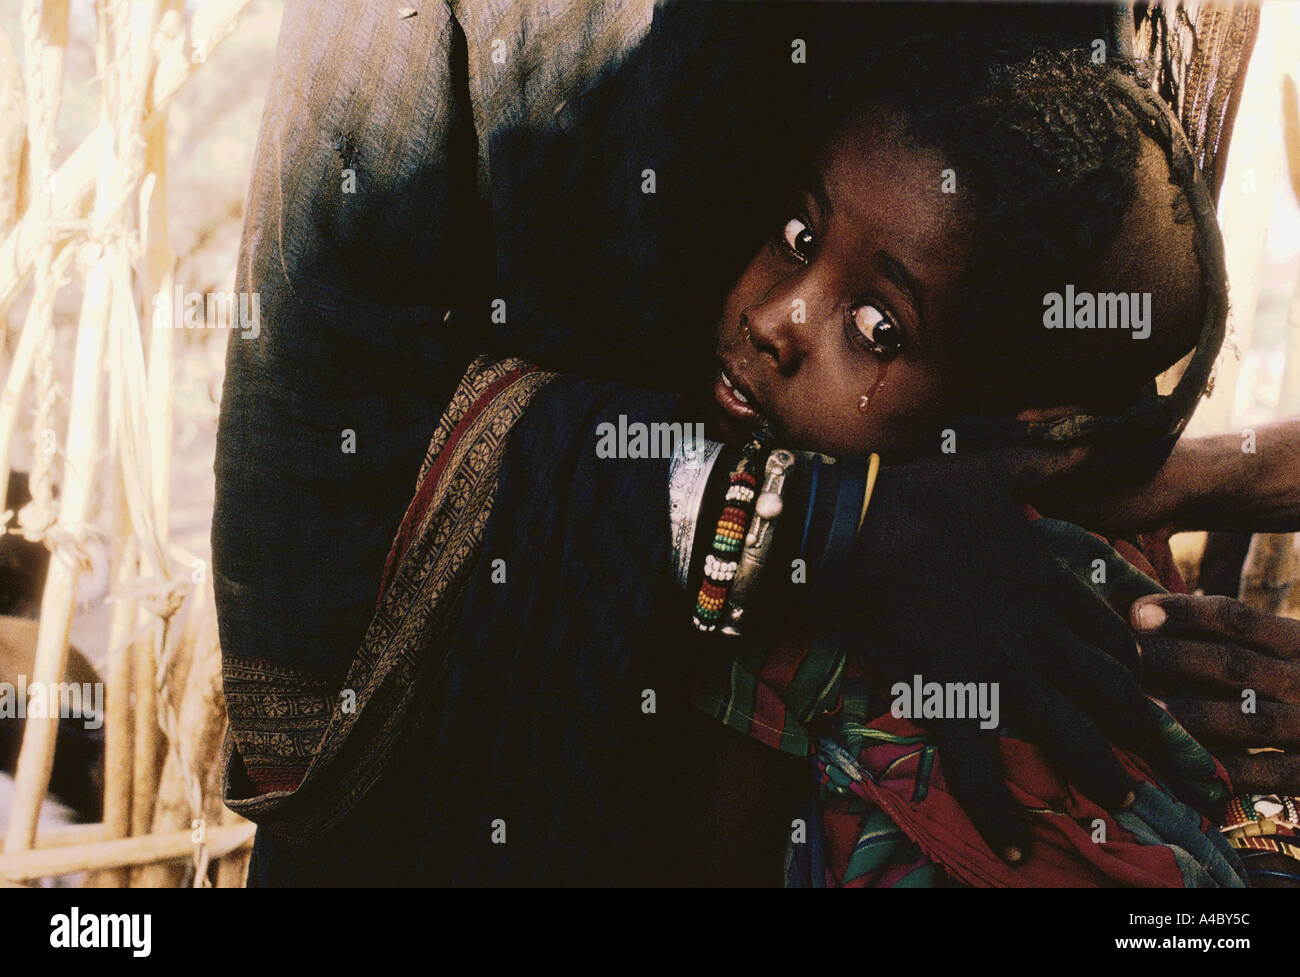 CRYING CHILD, BEING HELD IN MOTHERS ARMS, ERITREA, ETHIOPIA, 1991 Stock Photo